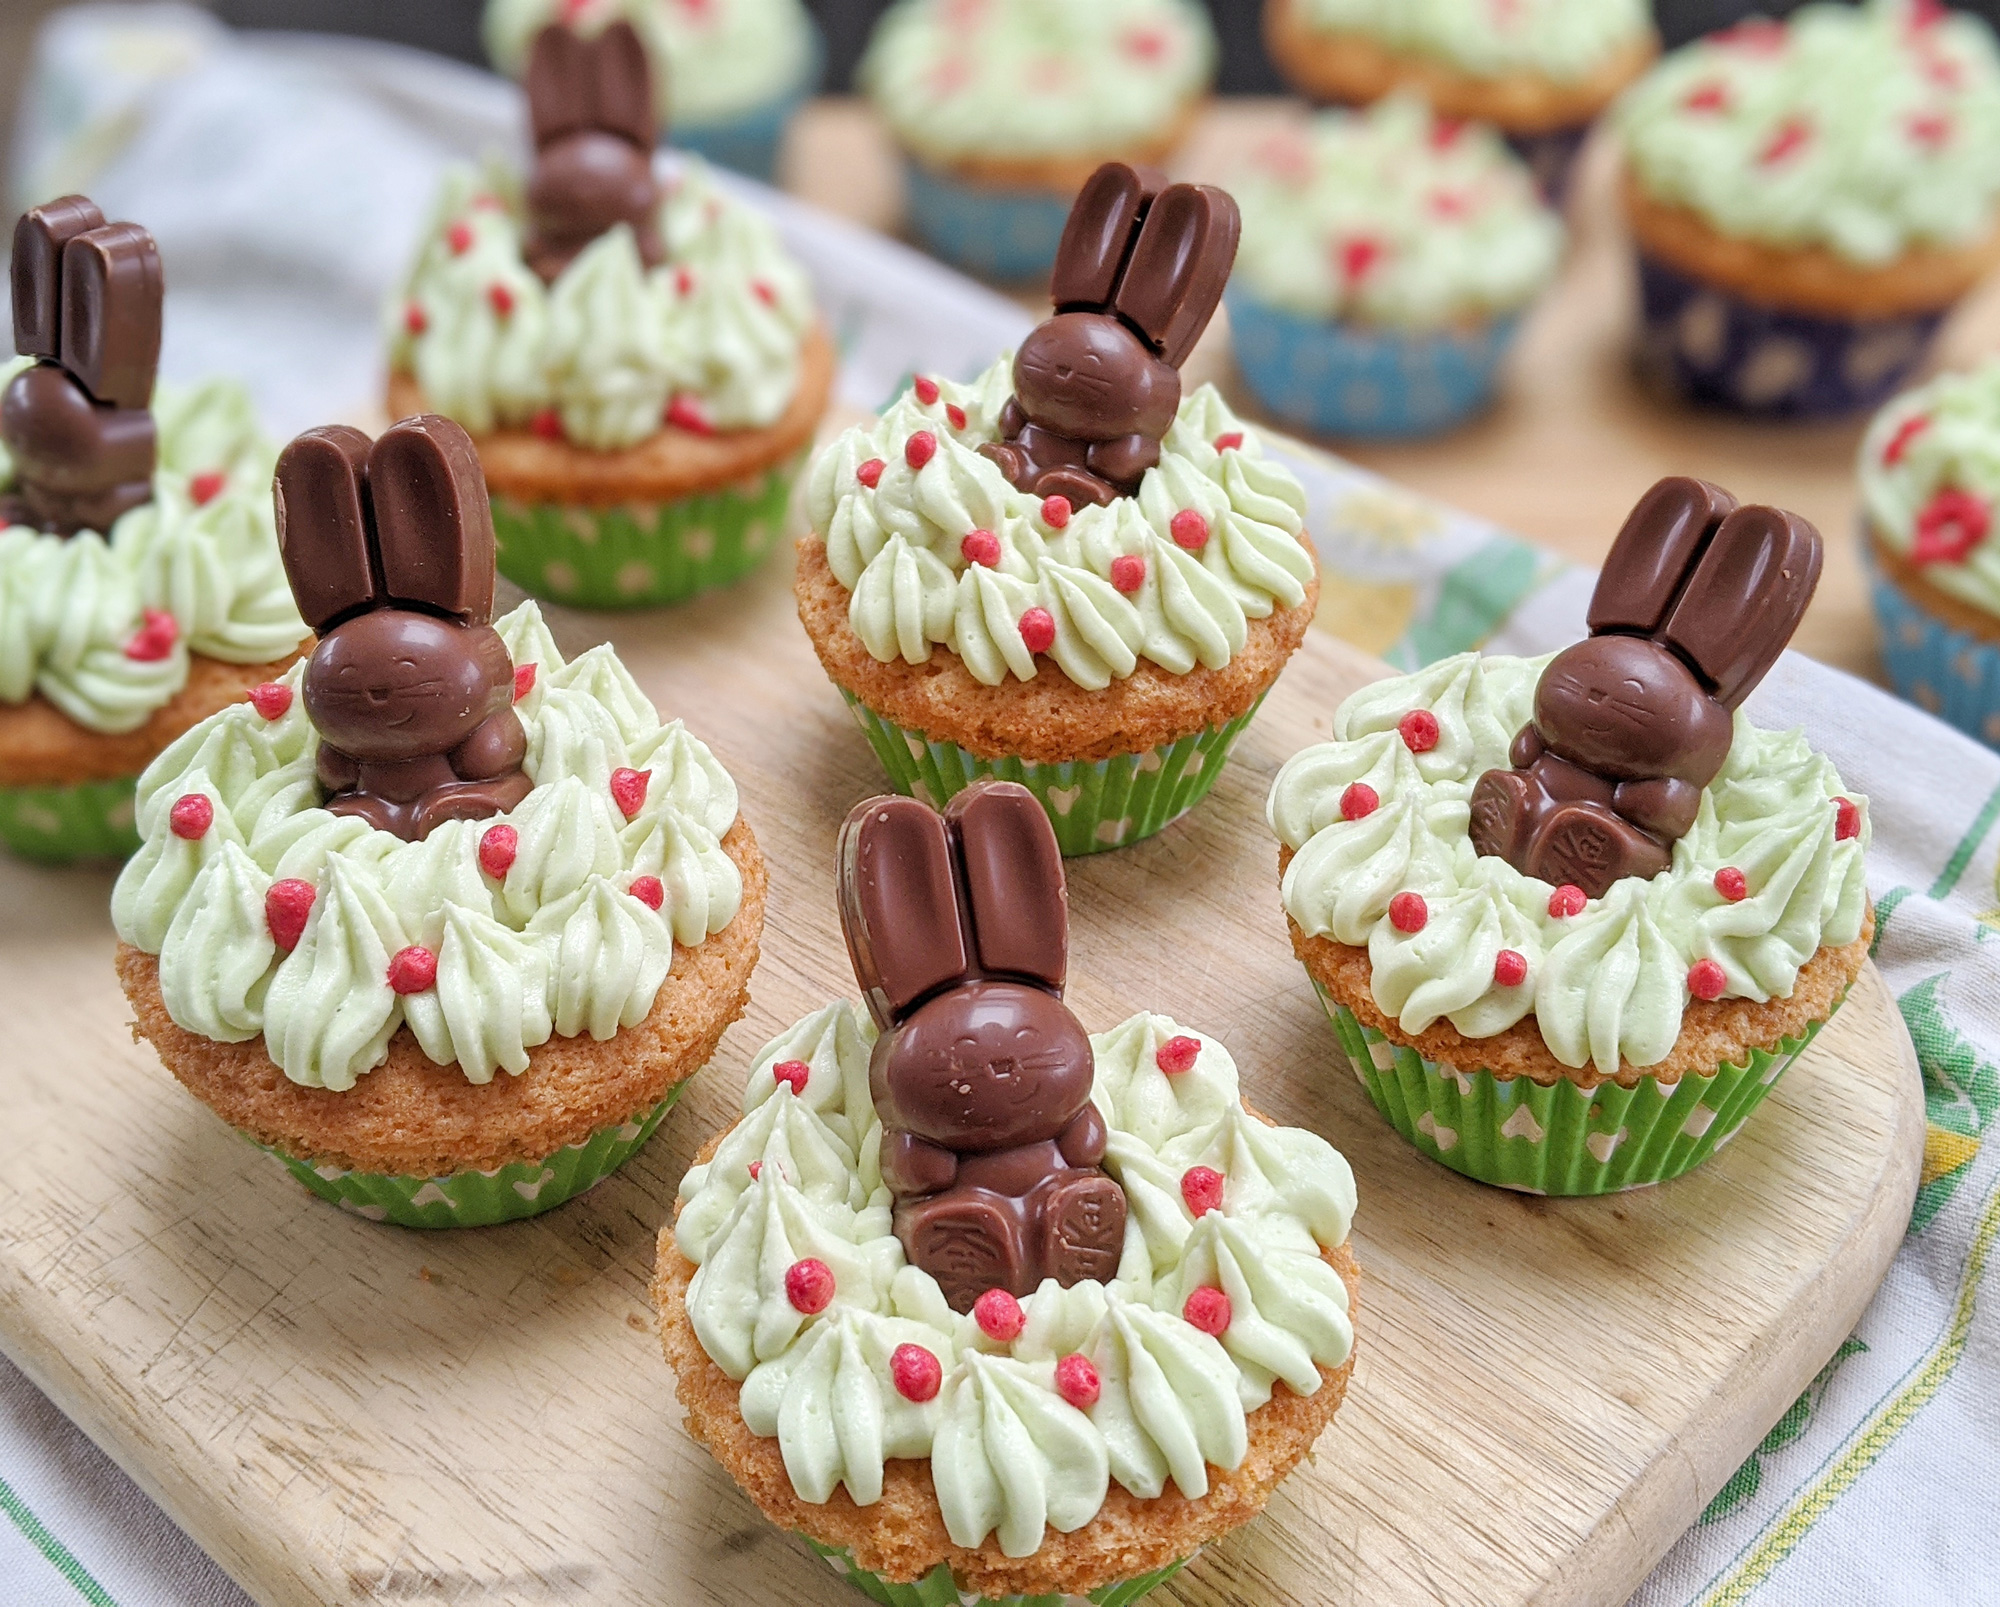 Gluten Free Easter Bunny Cupcakes Recipe - My Gluten Free Guide